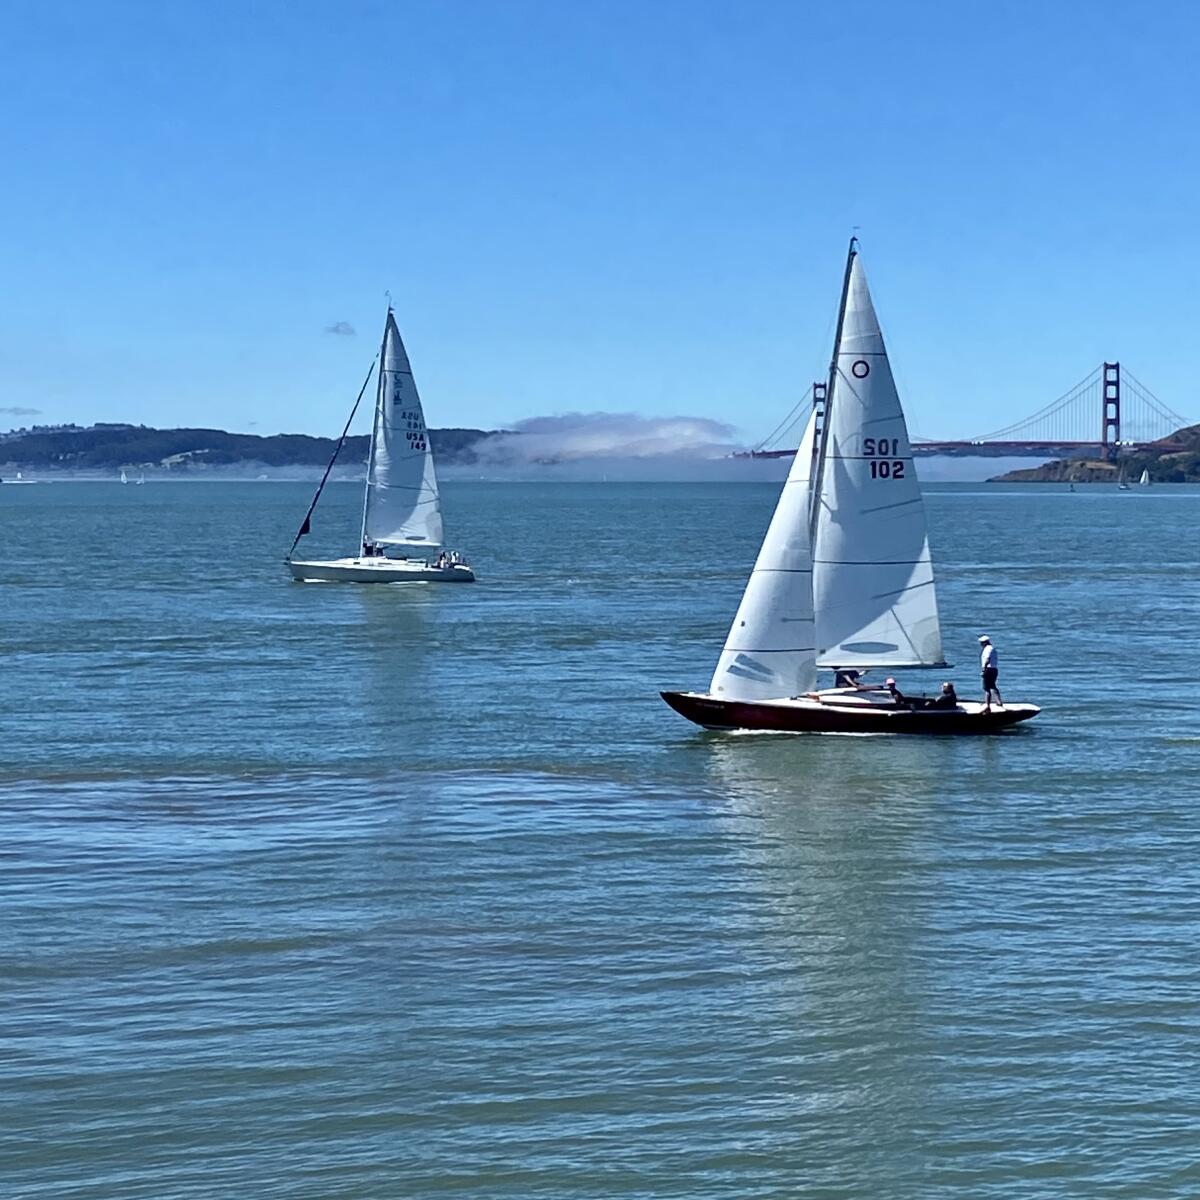 Boats sail in the San Francisco Bay with the Golden Gate Bridge visible in the background.